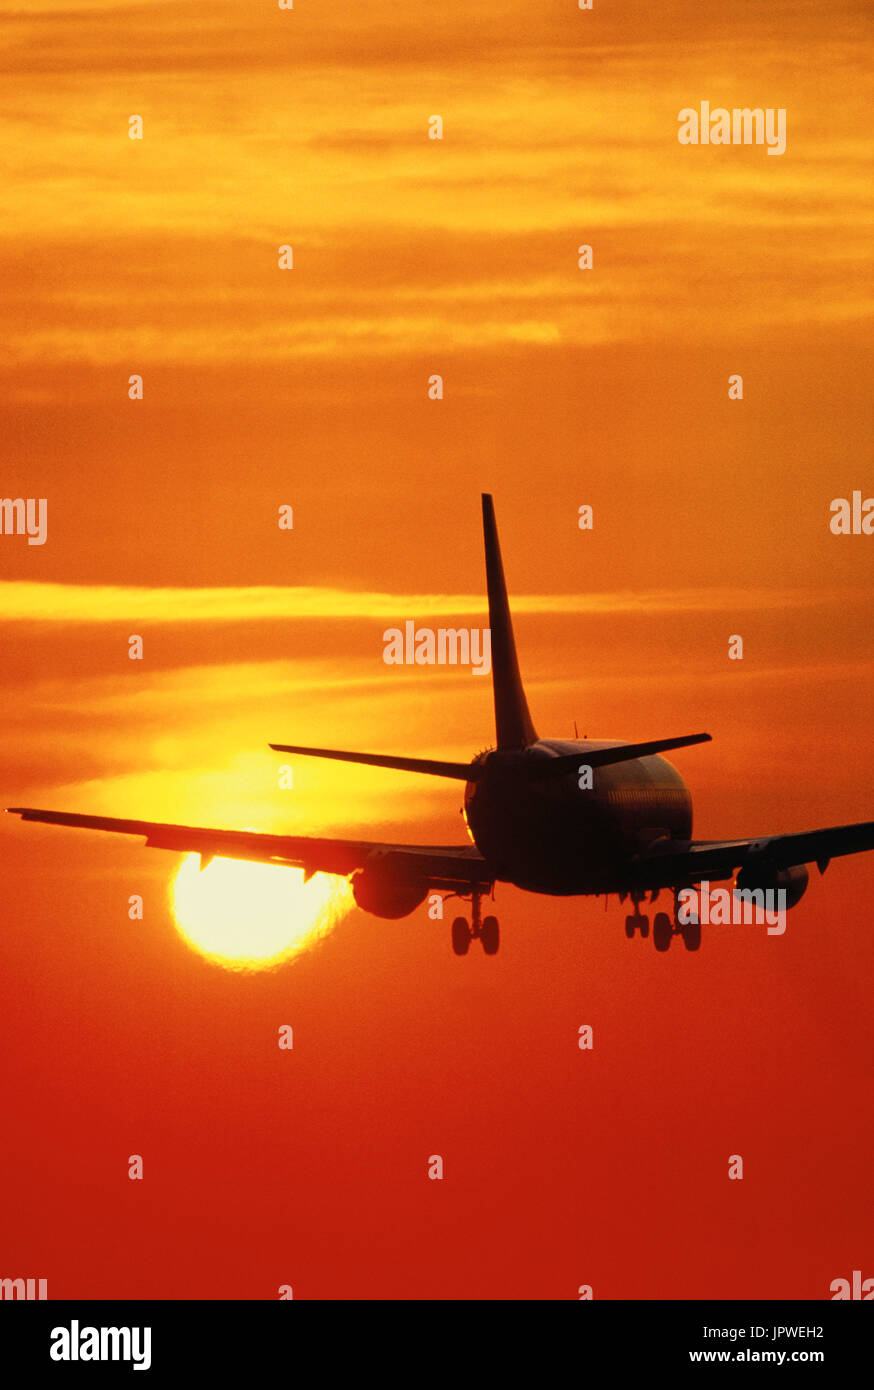 Boeing 737-200 on final-approach at sunset Stock Photo